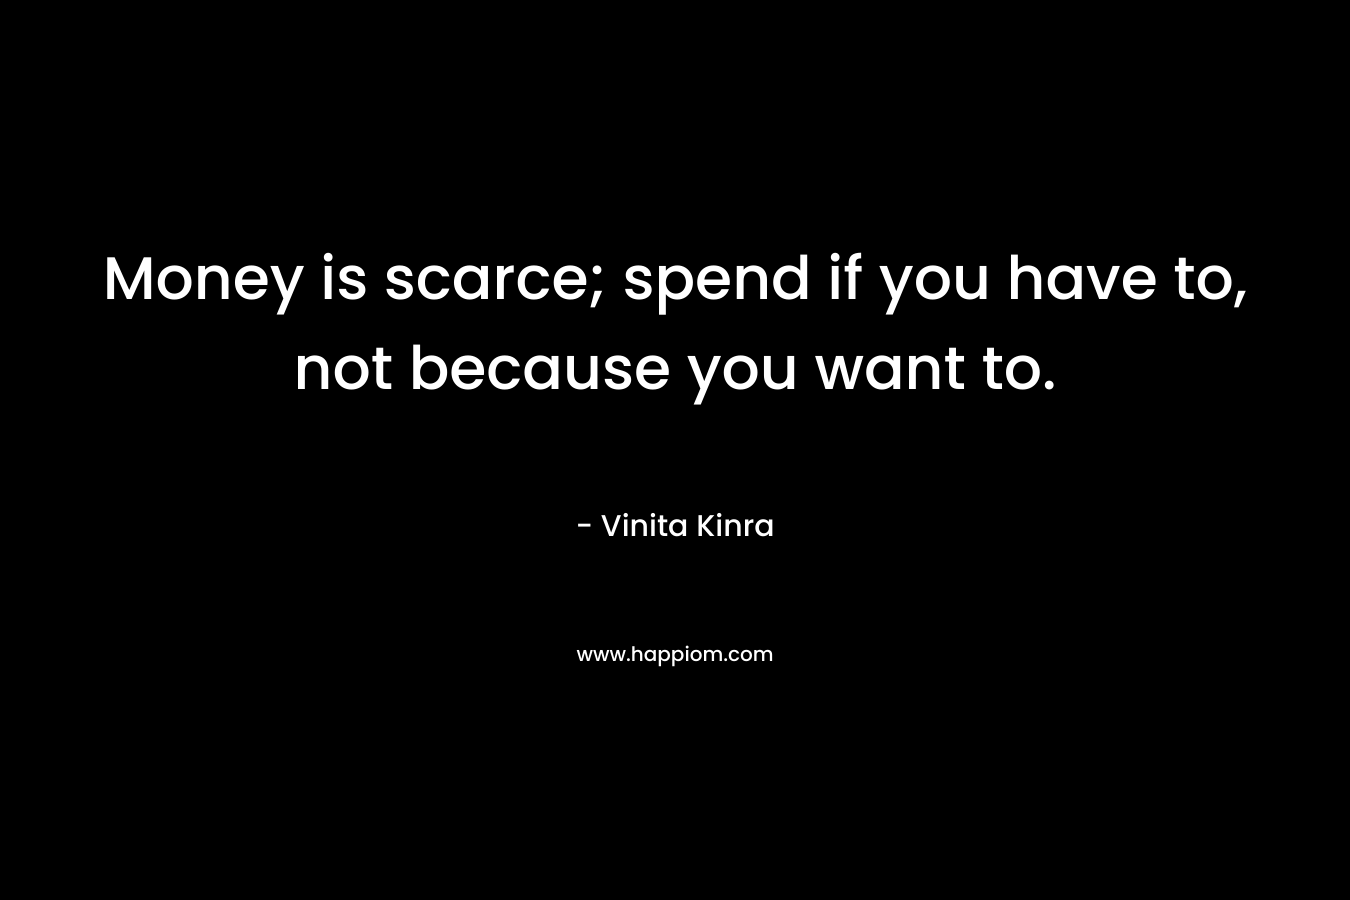 Money is scarce; spend if you have to, not because you want to.